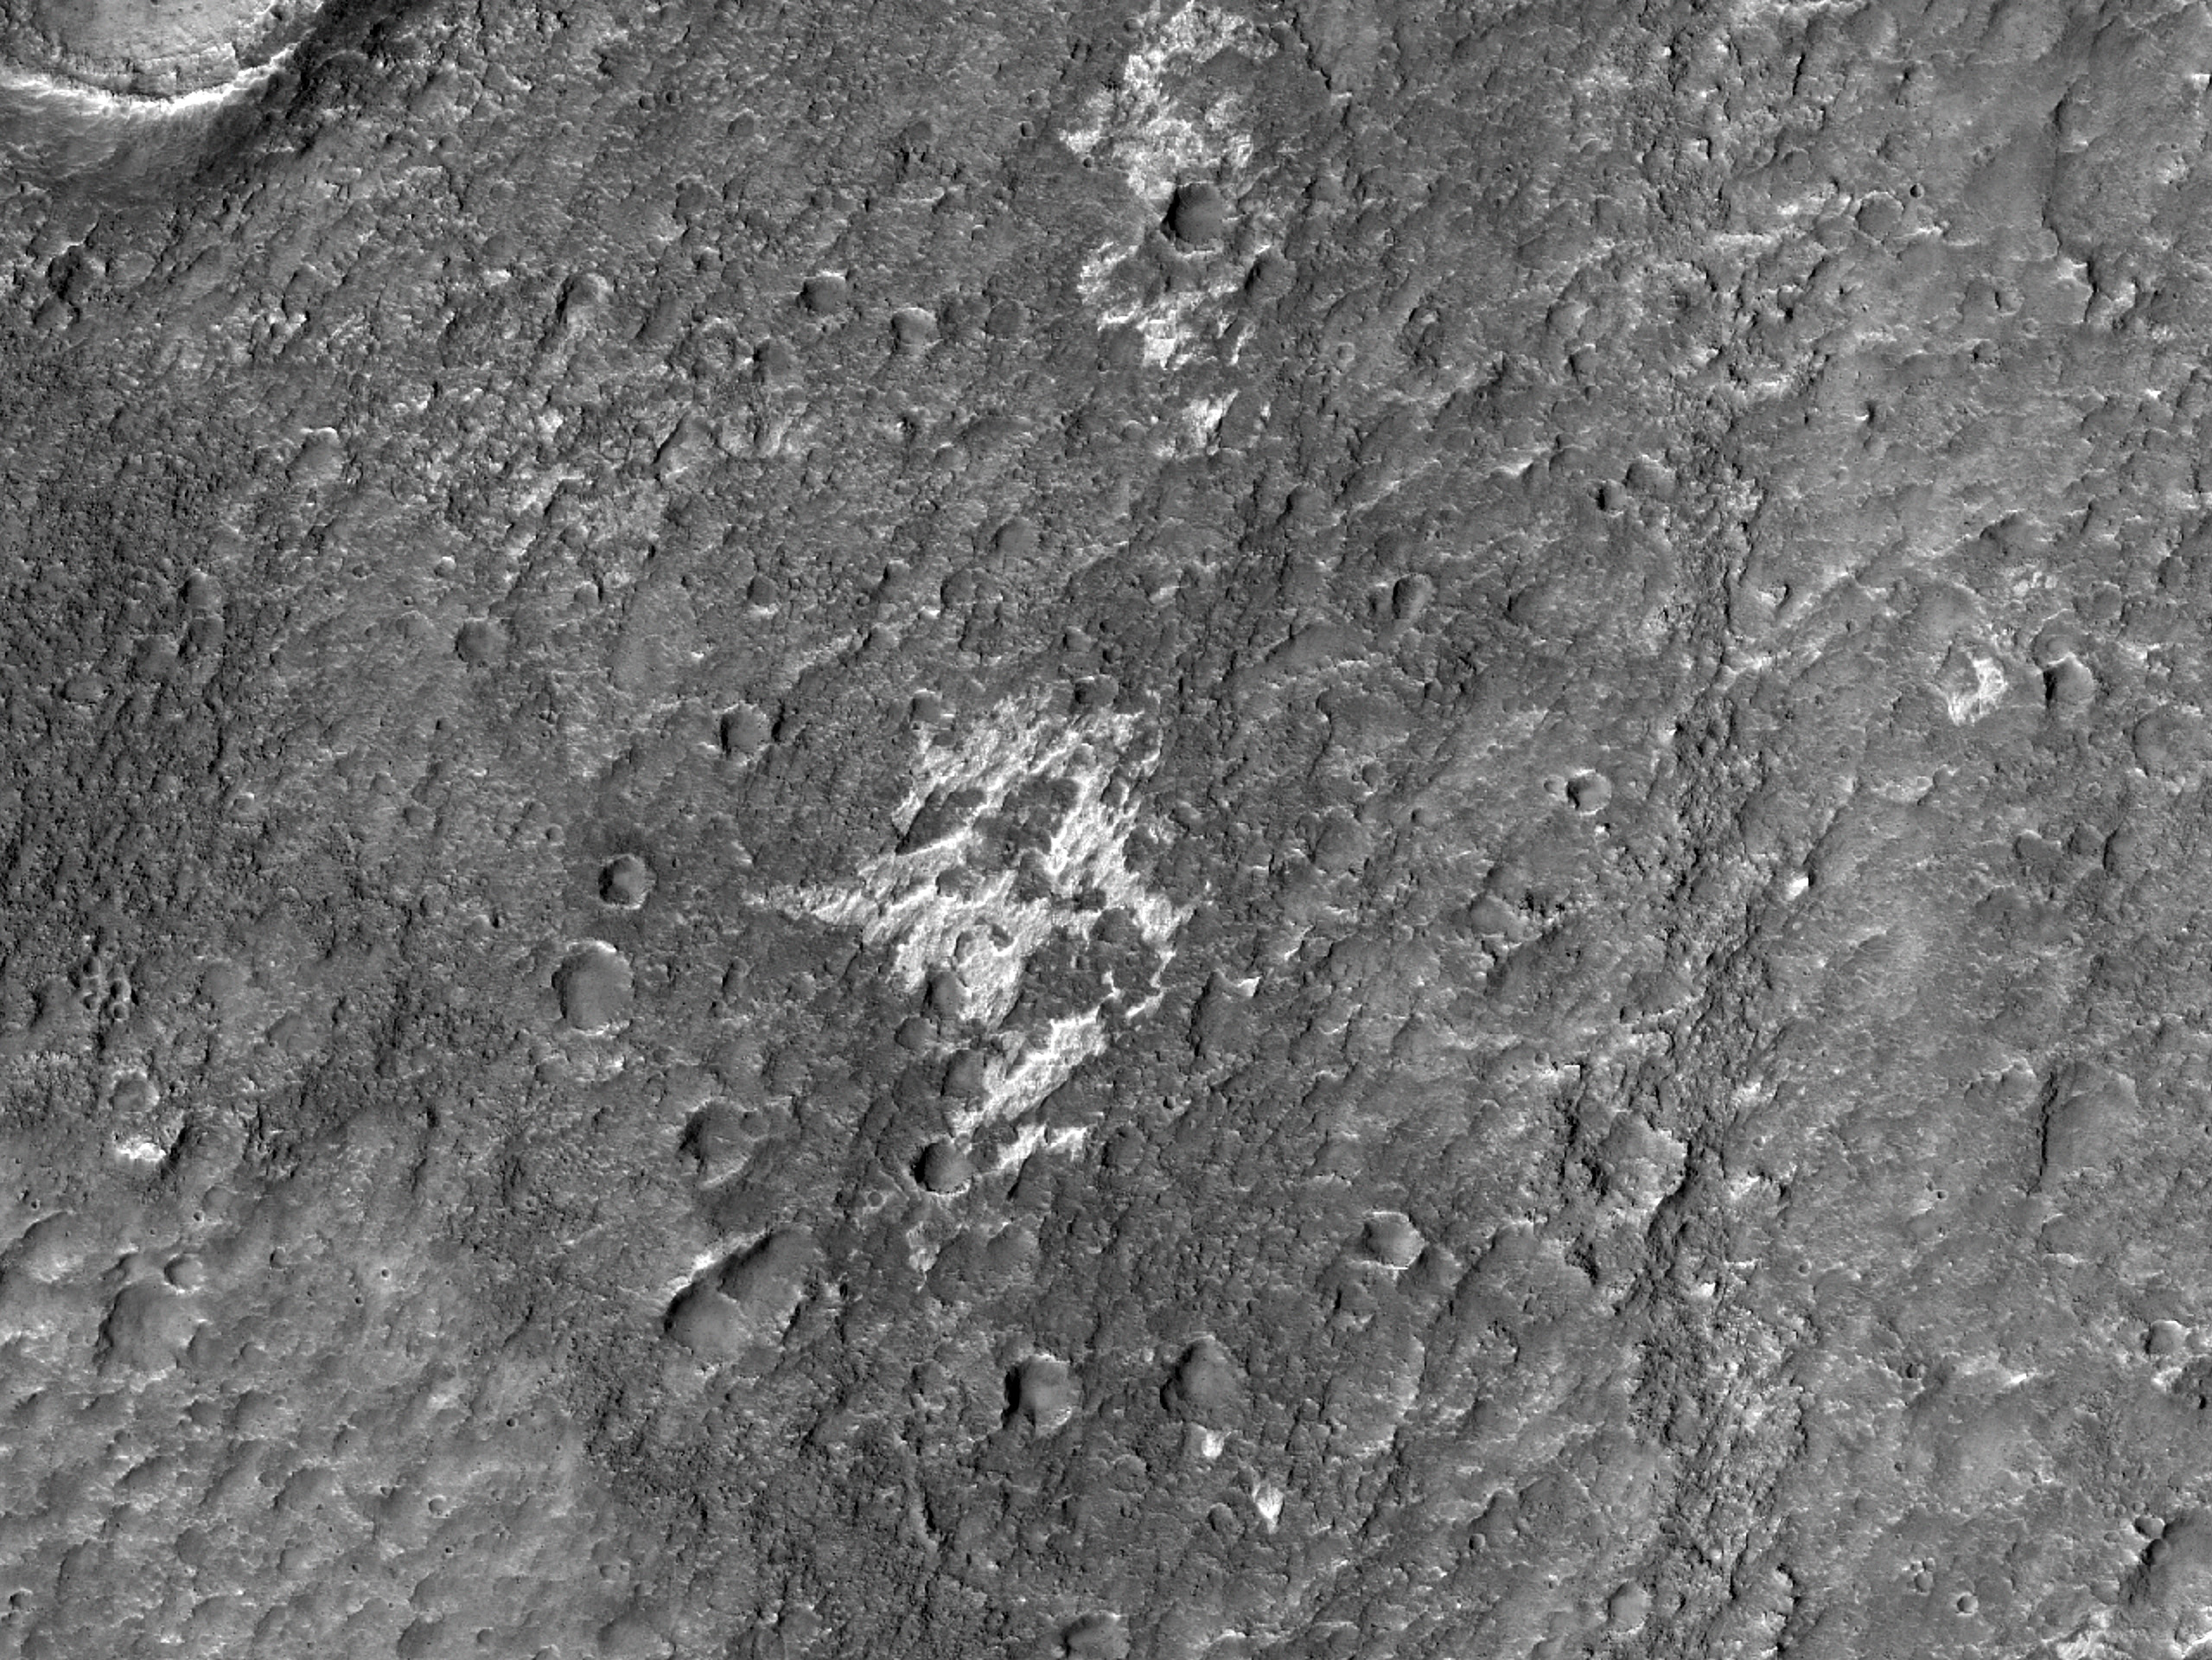 Patchy Outcrop of Light-Toned Materials